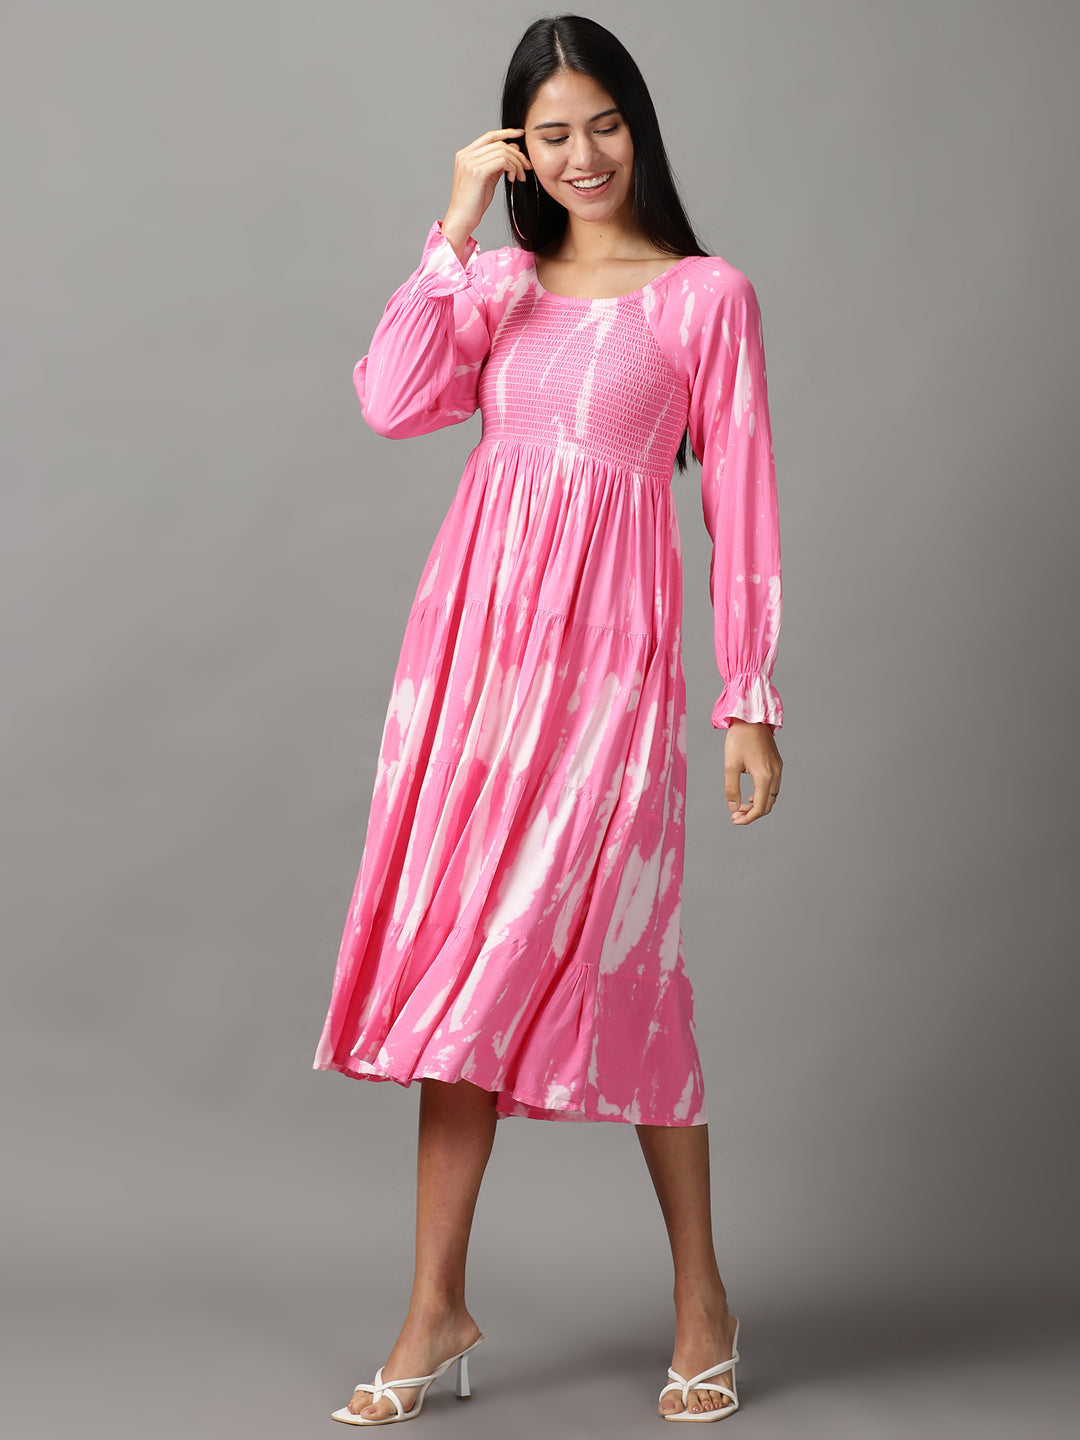 Women's Pink Tie Dye Fit and Flare Dress